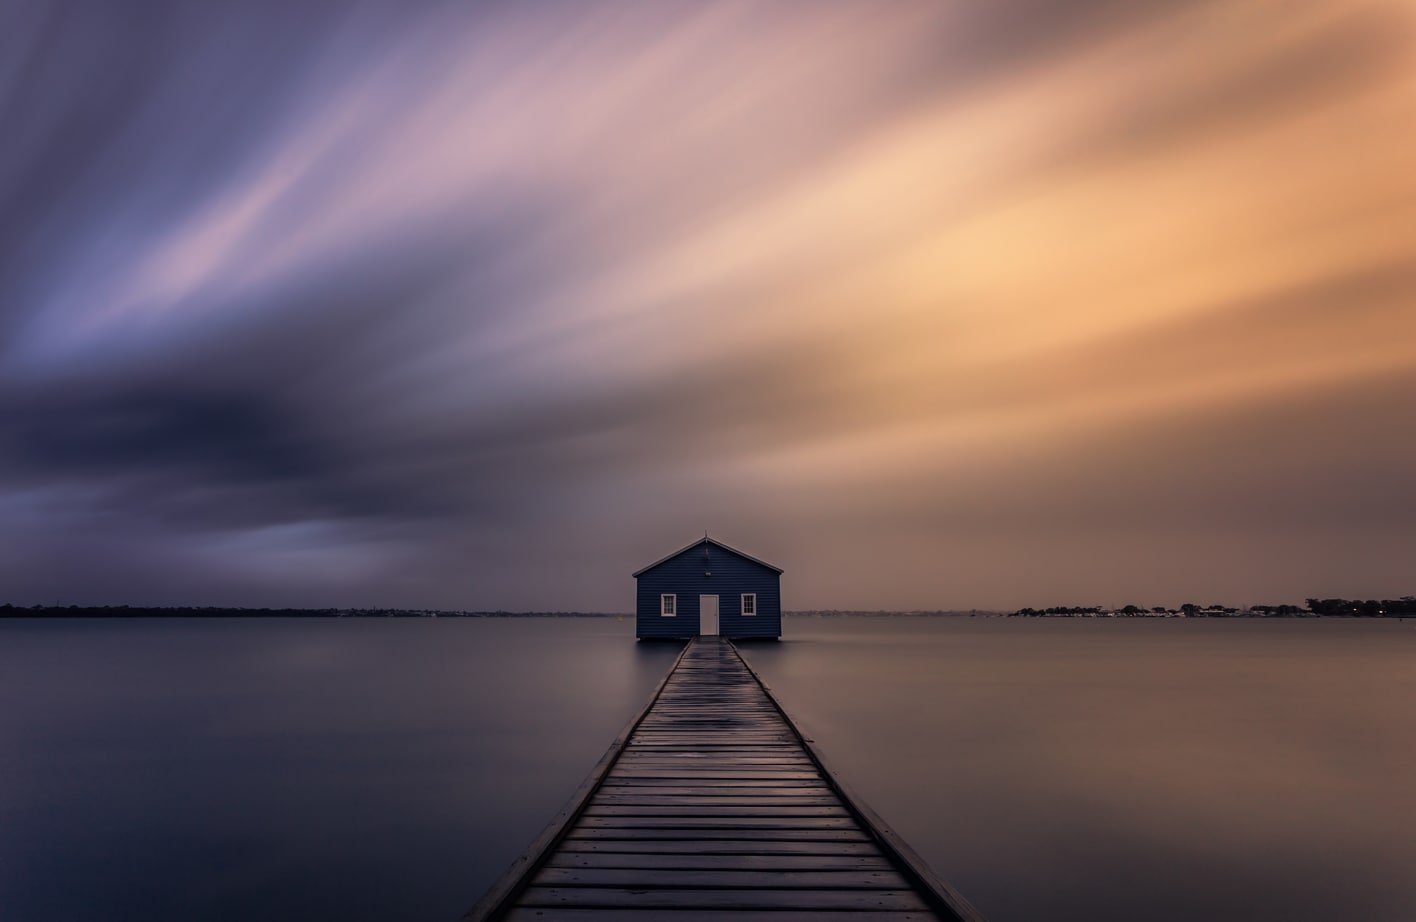 Long exposure photography guide